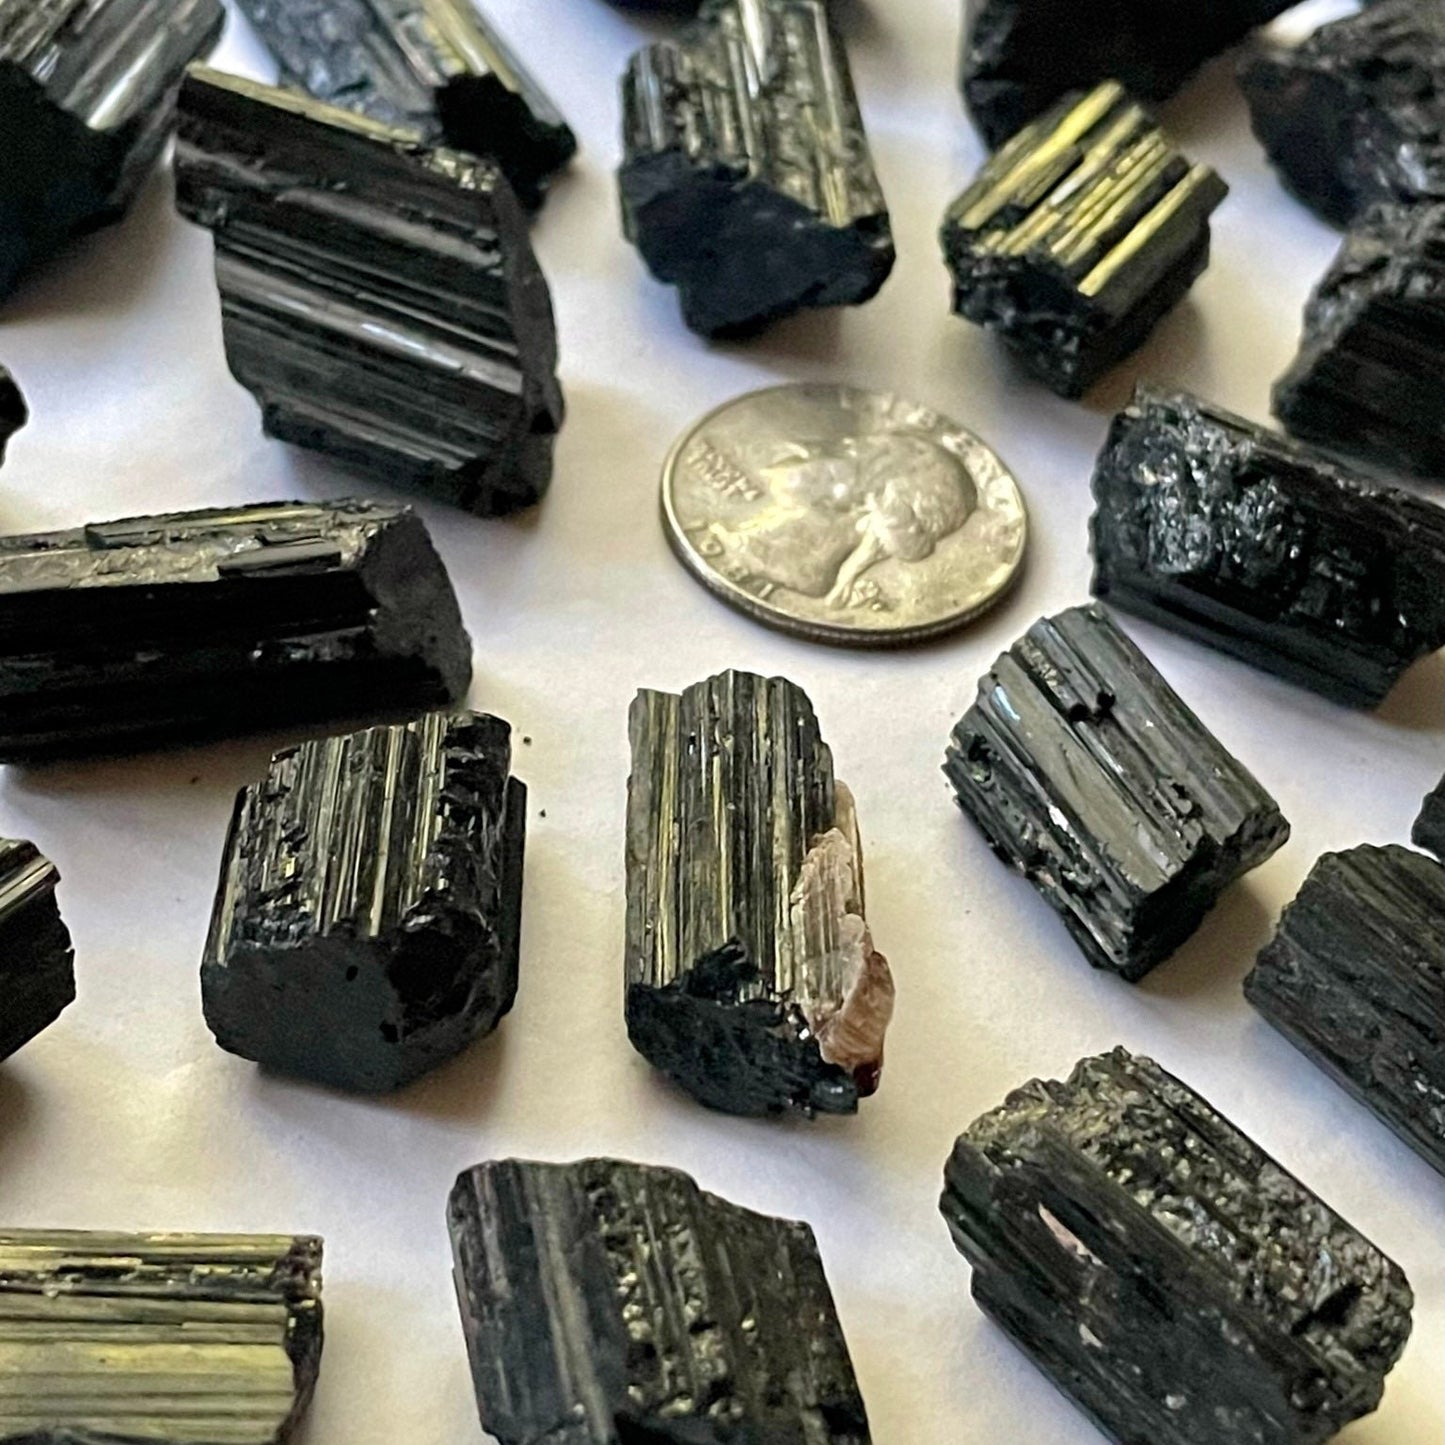 Black Tourmaline Schorl Crystals, Raw Black Tourmaline Specimens *Protection & Grounding* Charged w/ Reiki + Sustainably Mined in Brazil